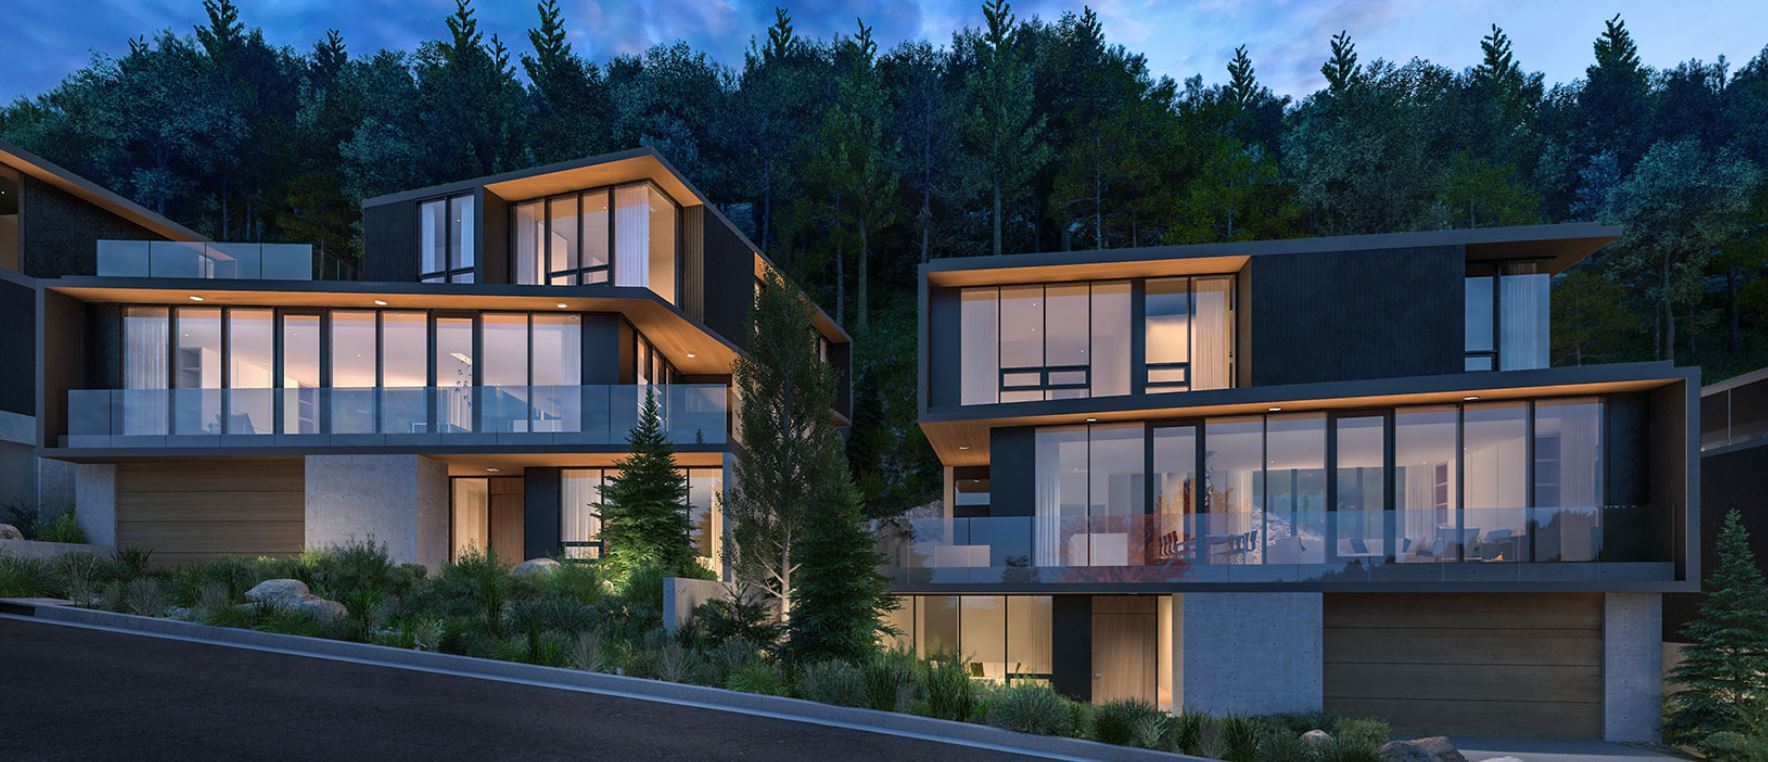 A limited collection of ten West Coast homes designed by award-winning BattersbyHowat.